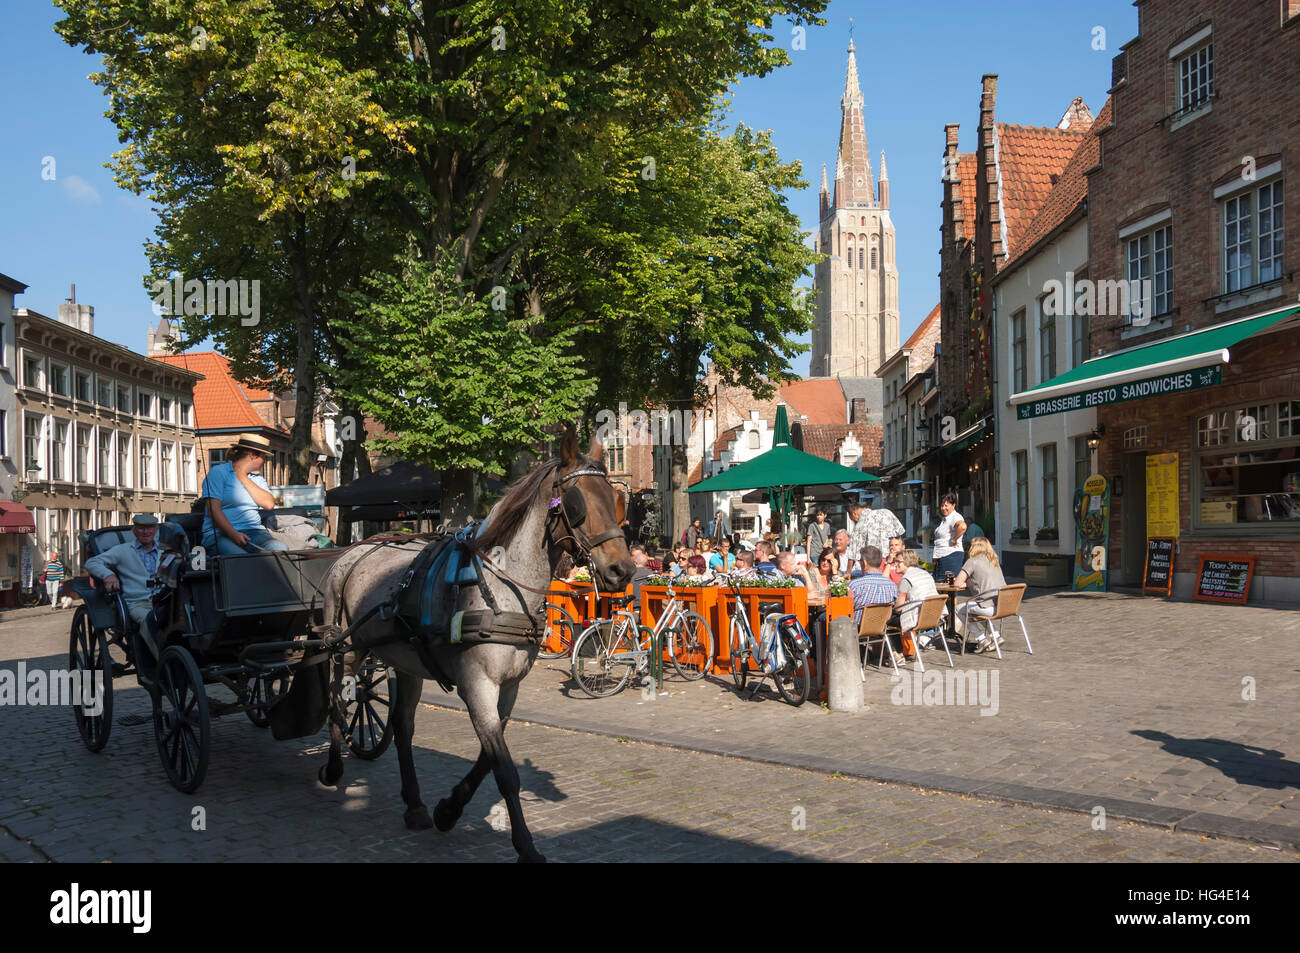 Square with cafe, horse and carriage, and spire of Church of Our Lady, Bruges, Belgium Stock Photo